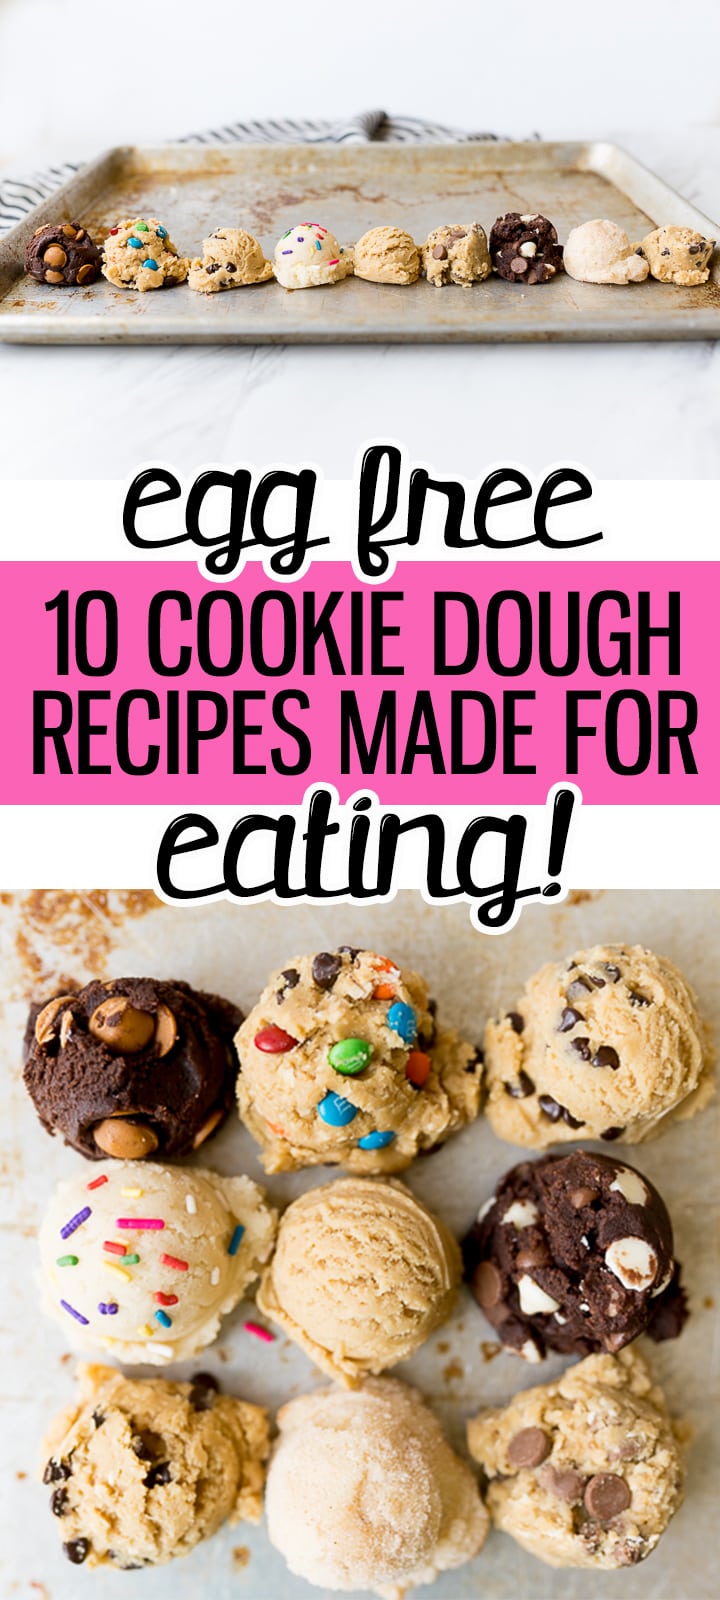 Image of eggless cookie dough balls. Across the top it says "egg free 10 cookie dough recipes made for eating" in text. 